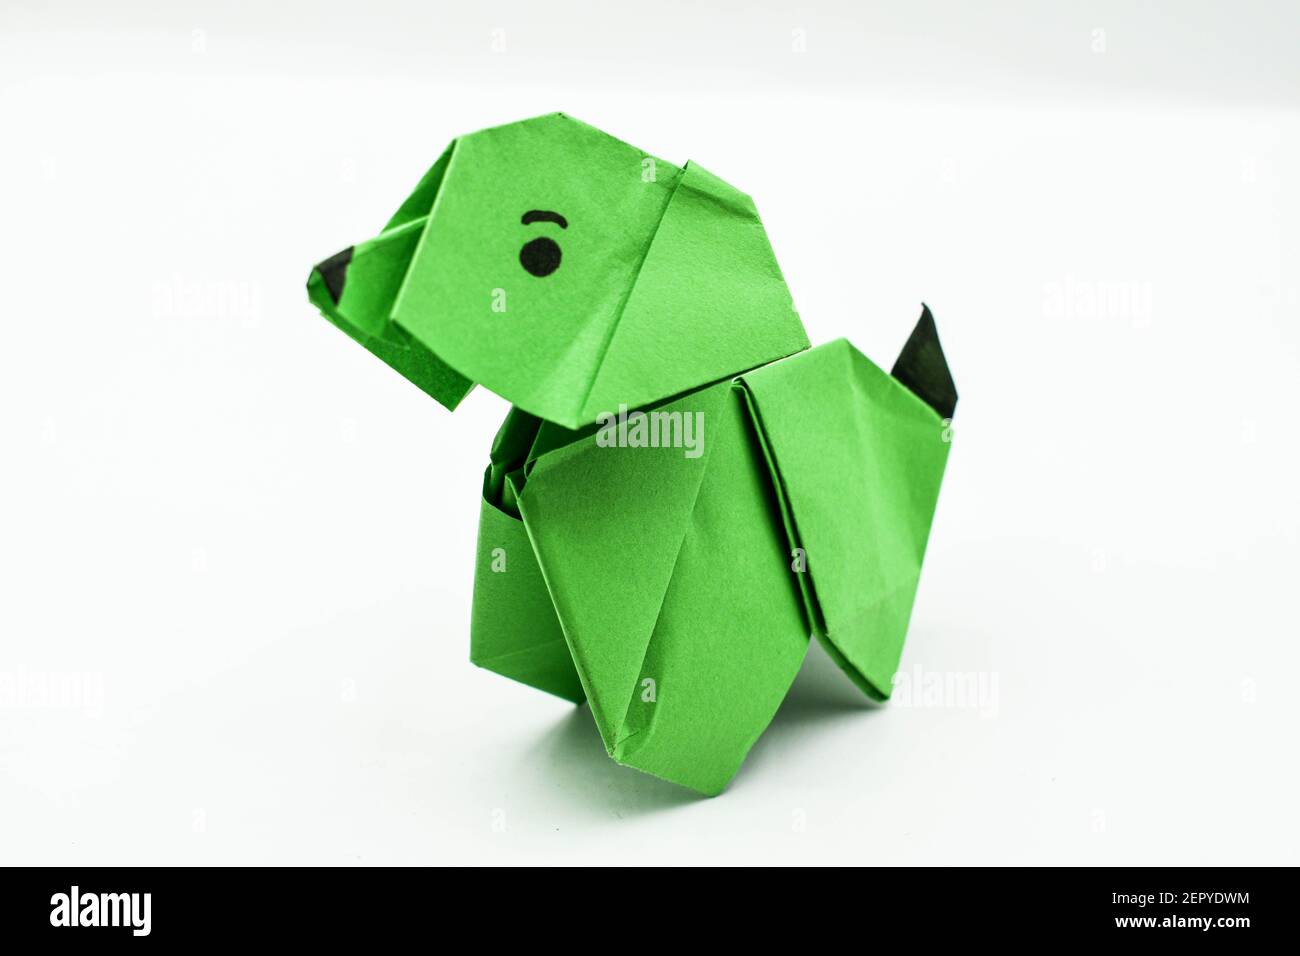 Green origami dog isolated on white background.Satisfying art with paper. Stock Photo